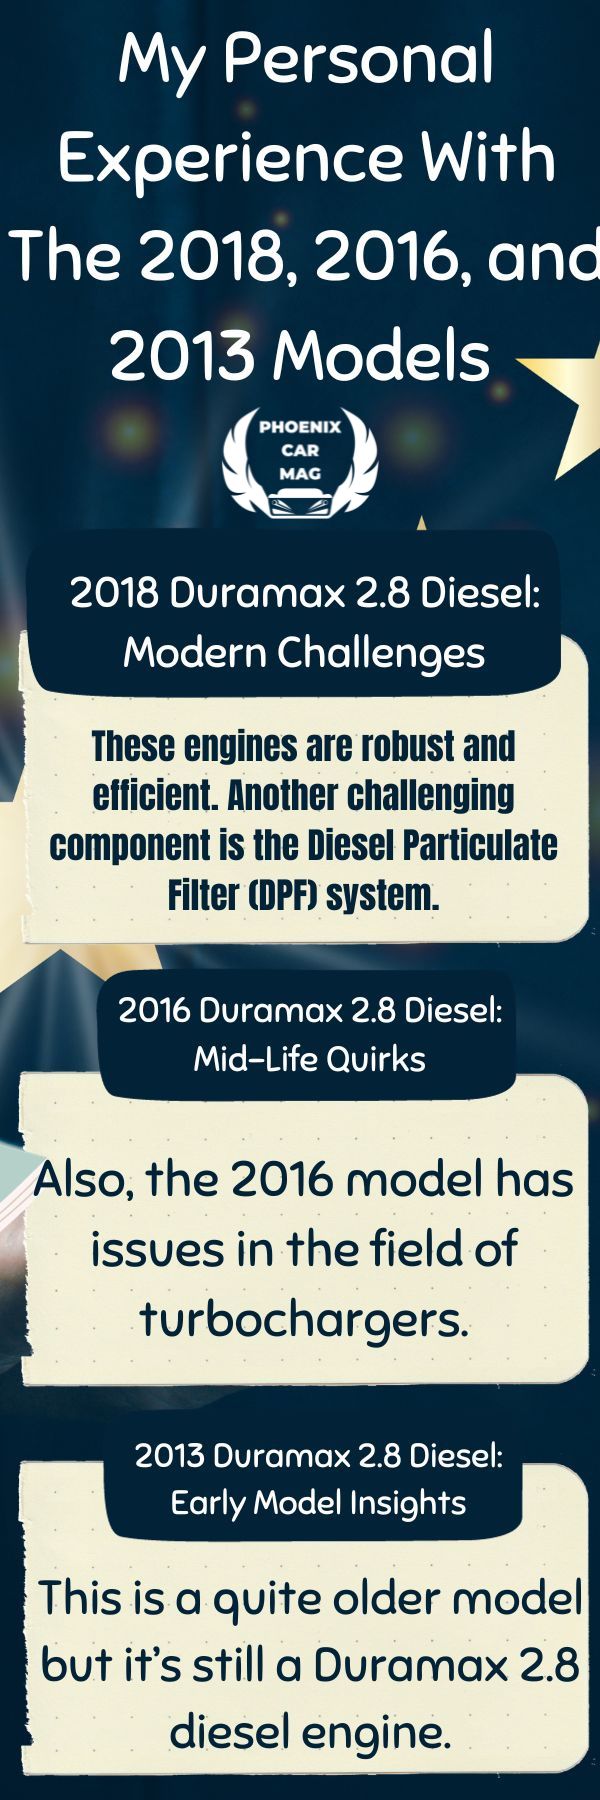 infographic about My Personal Experience With The 2018, 2016, and 2013 Models